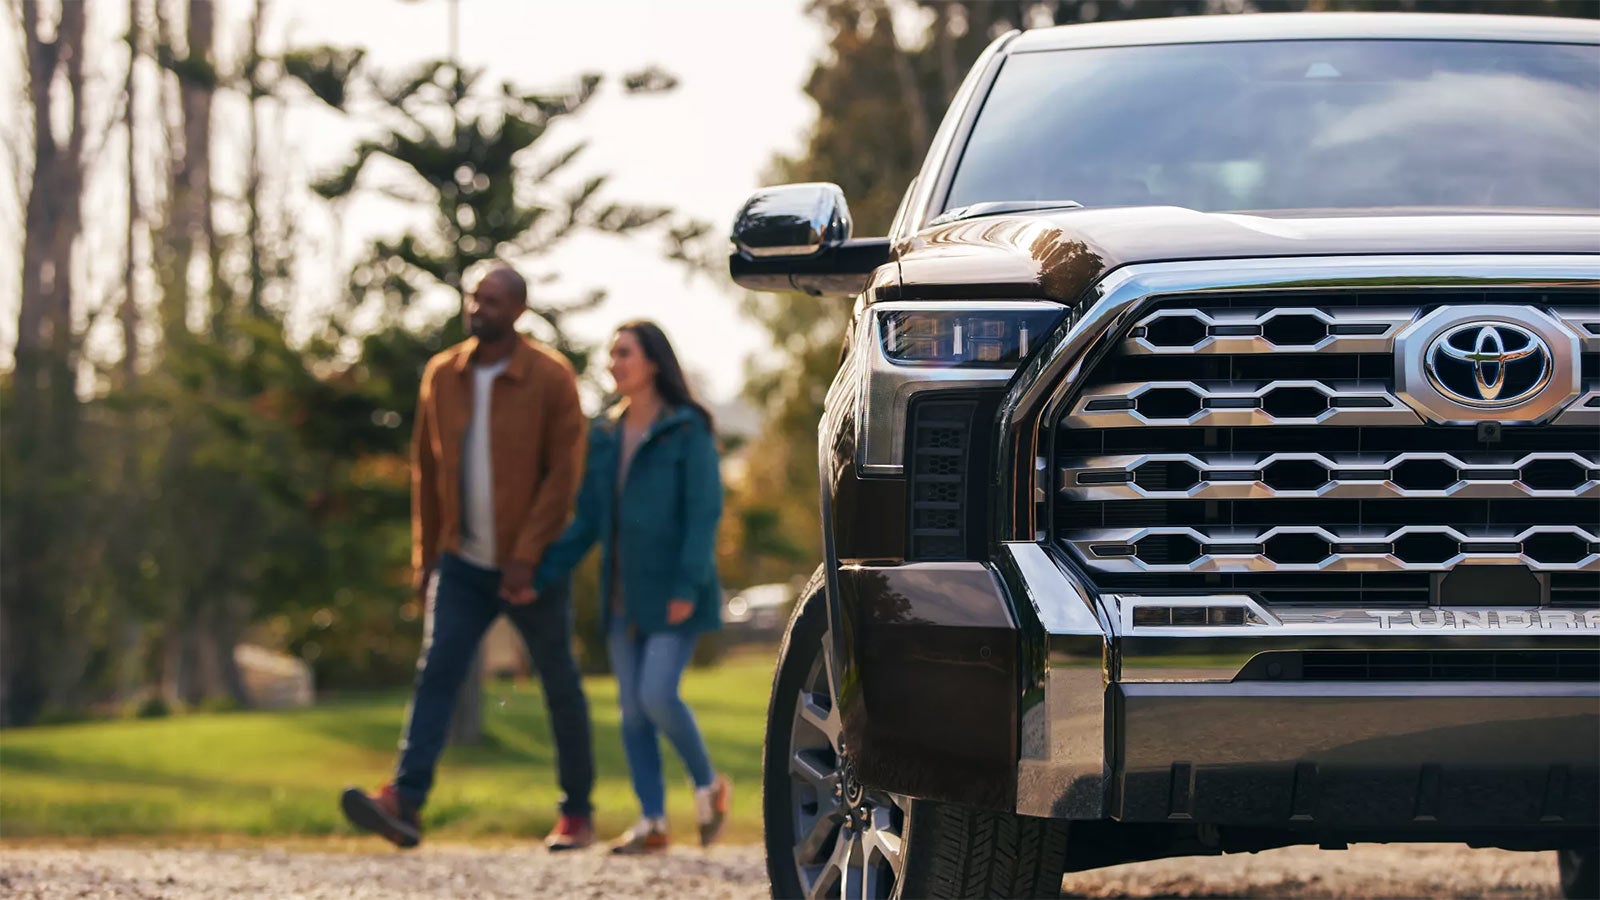 2022 Toyota Tundra Gallery | Family Toyota of Burleson in Burleson TX